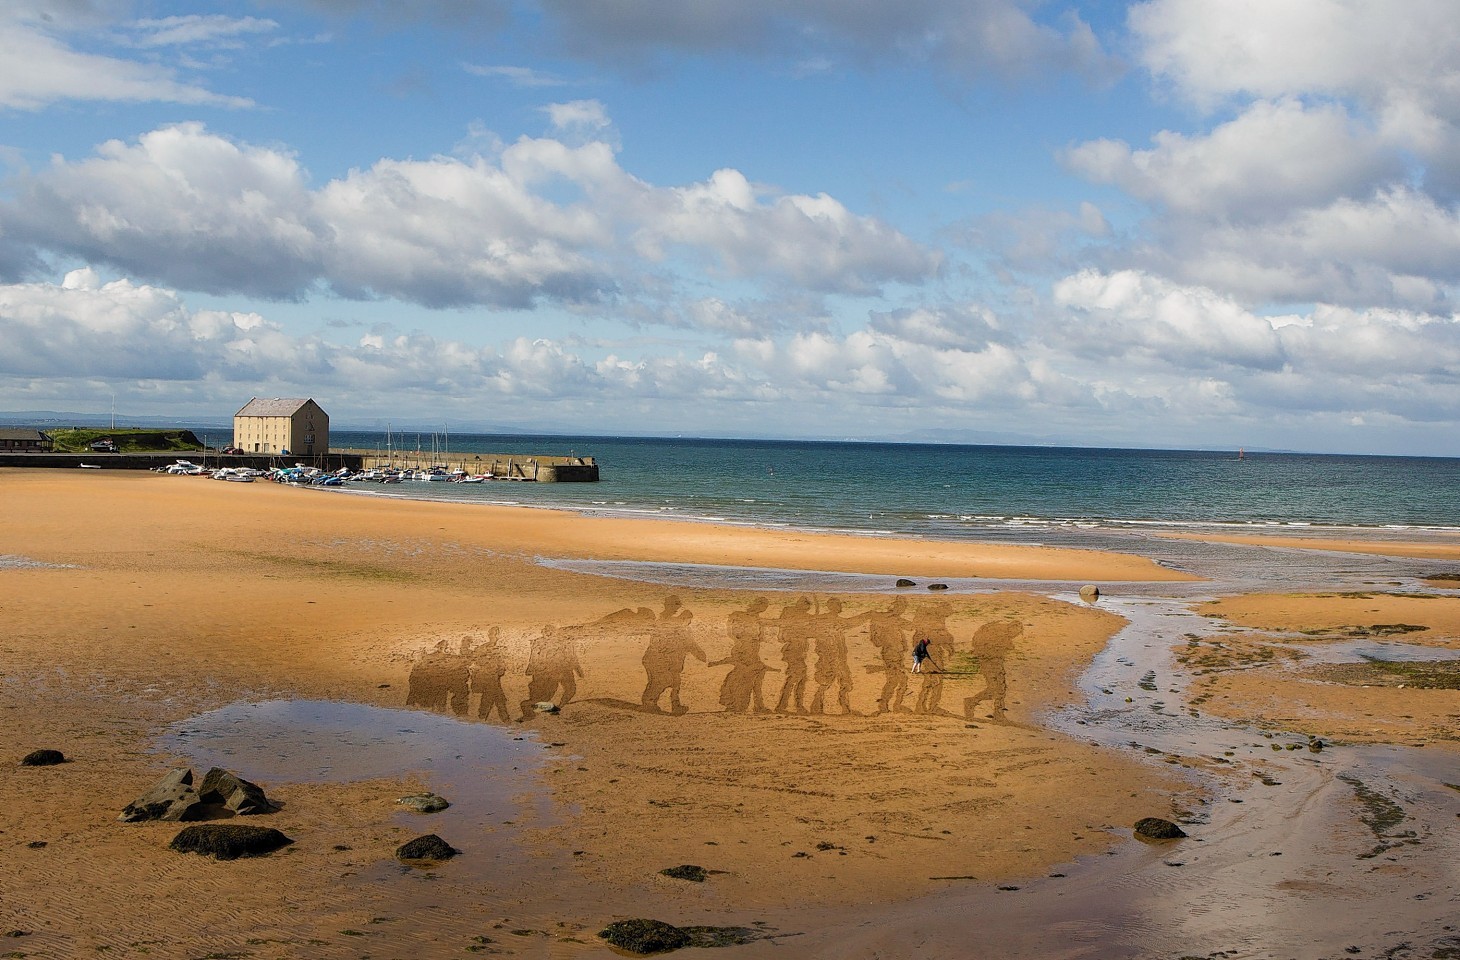 Sand drawing "Somme Soldiers" by Sand In Their Eye, on the beach in Elie, Fife